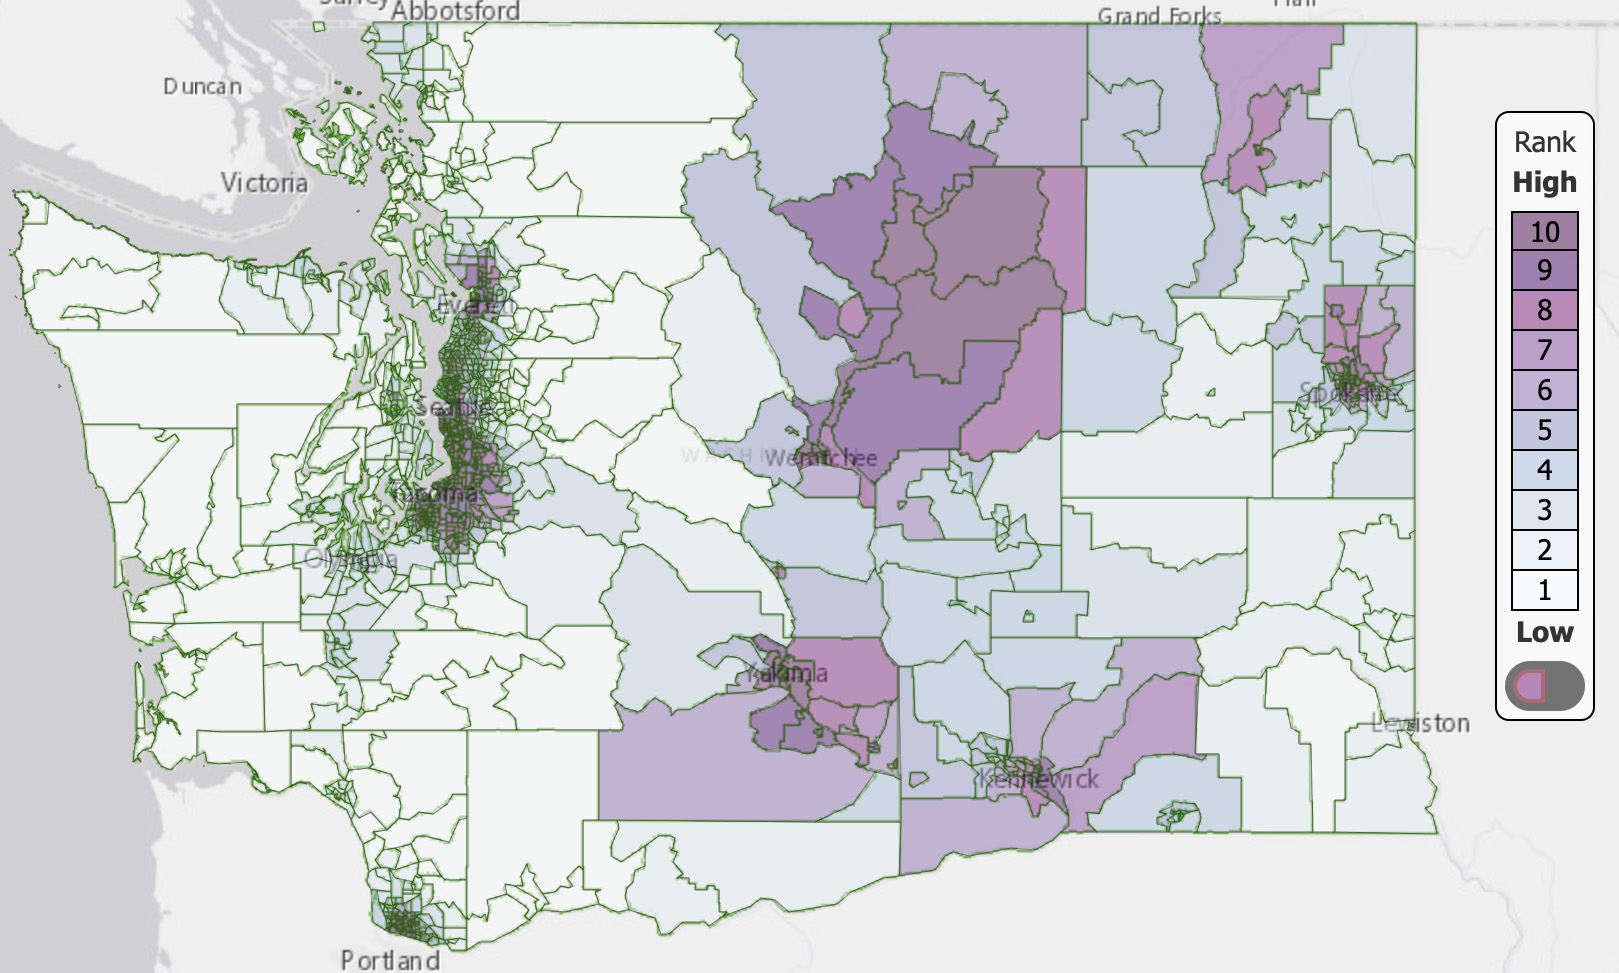 Map of percentage of people of color across Washington state showing the highest percentage in the corridor including Everett, Seattle and Tacoma, as well as the areas surrounding Wenatchee, Yakima, Kennewick, Spokane and the Okanogan Valley.